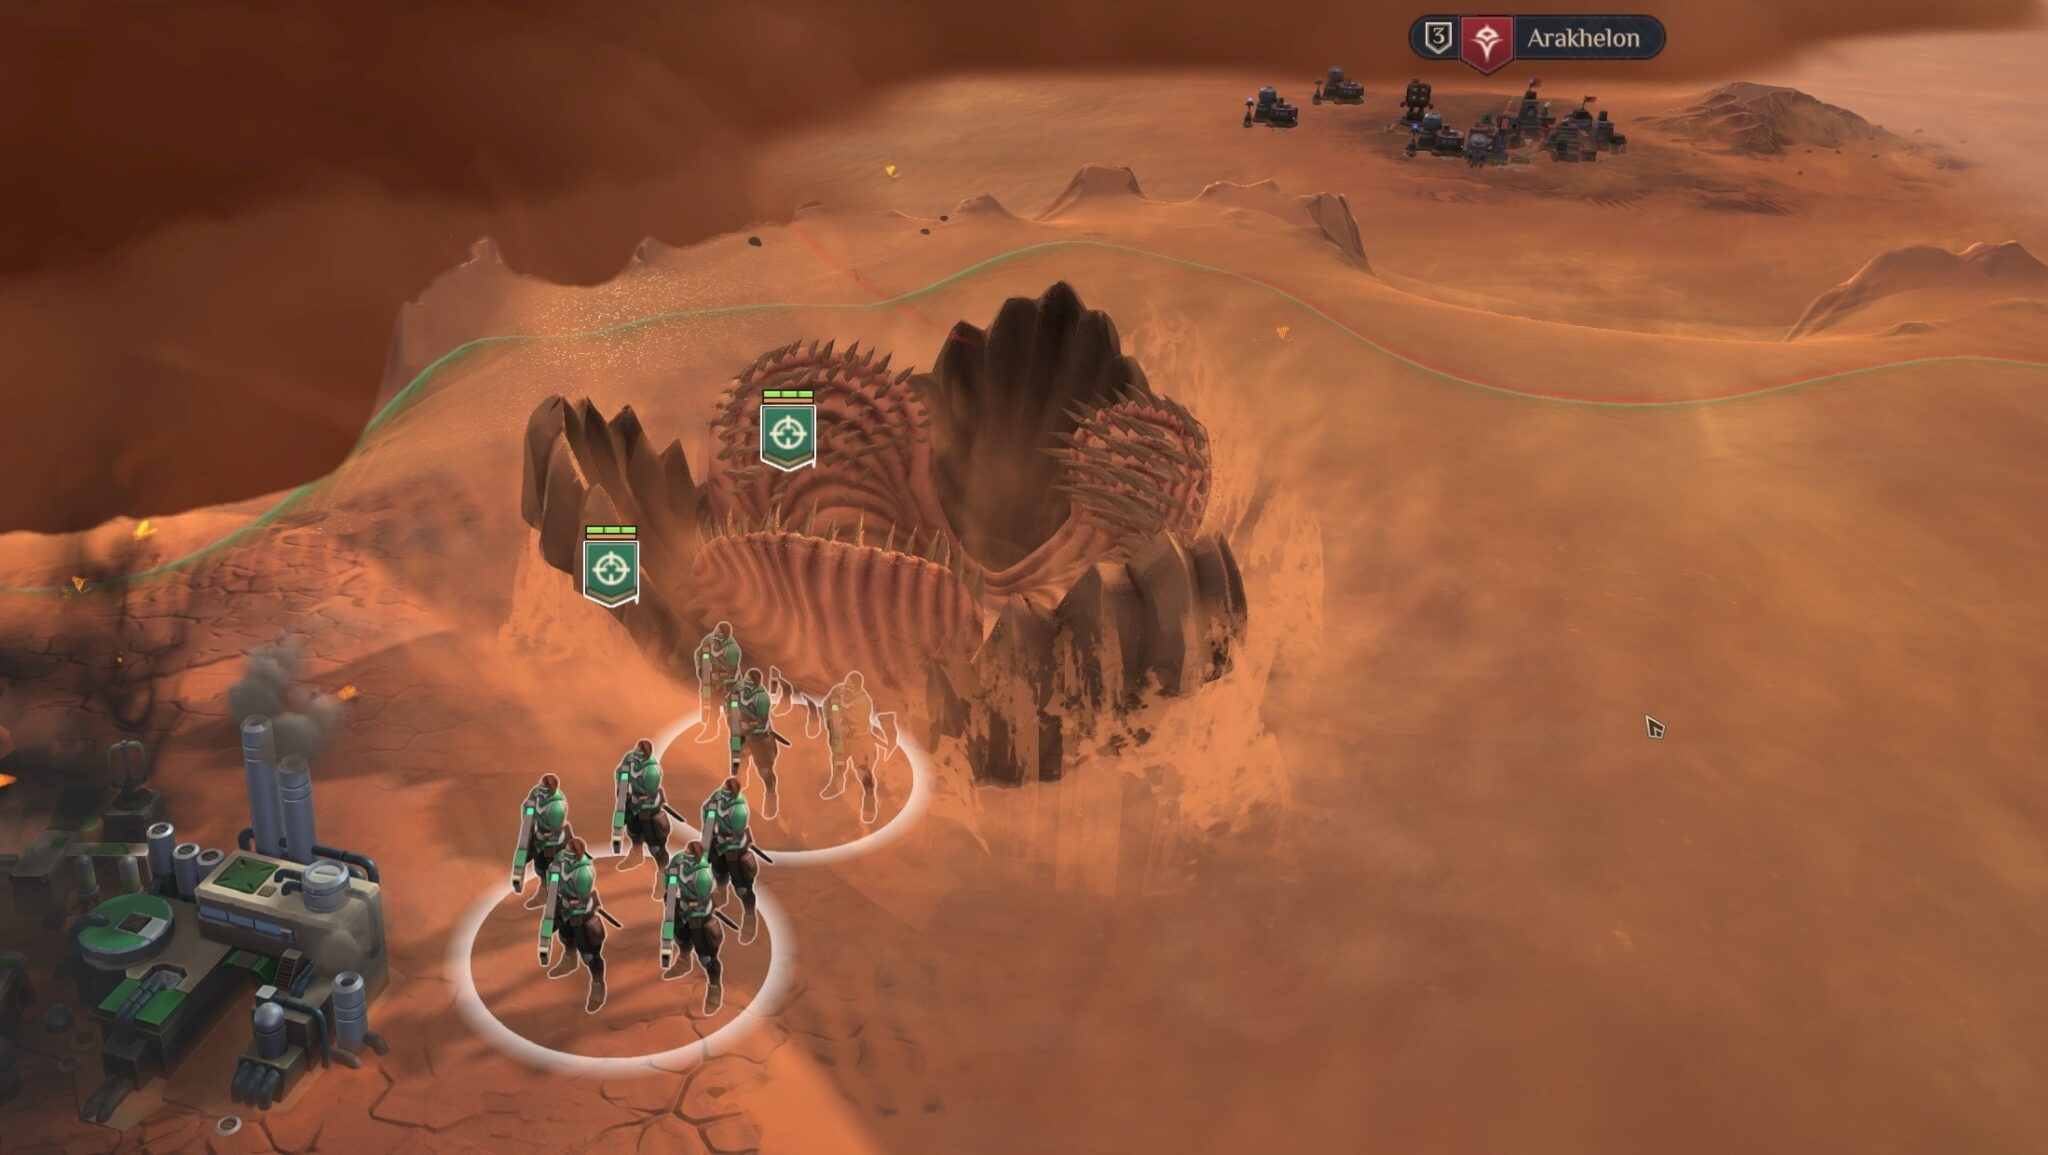 (There were only two left: A sandworm grabs the rear infantry squad. The giant beasts especially like our Spice Harvesters, but we can evacuate them automatically via Carryall air transport).